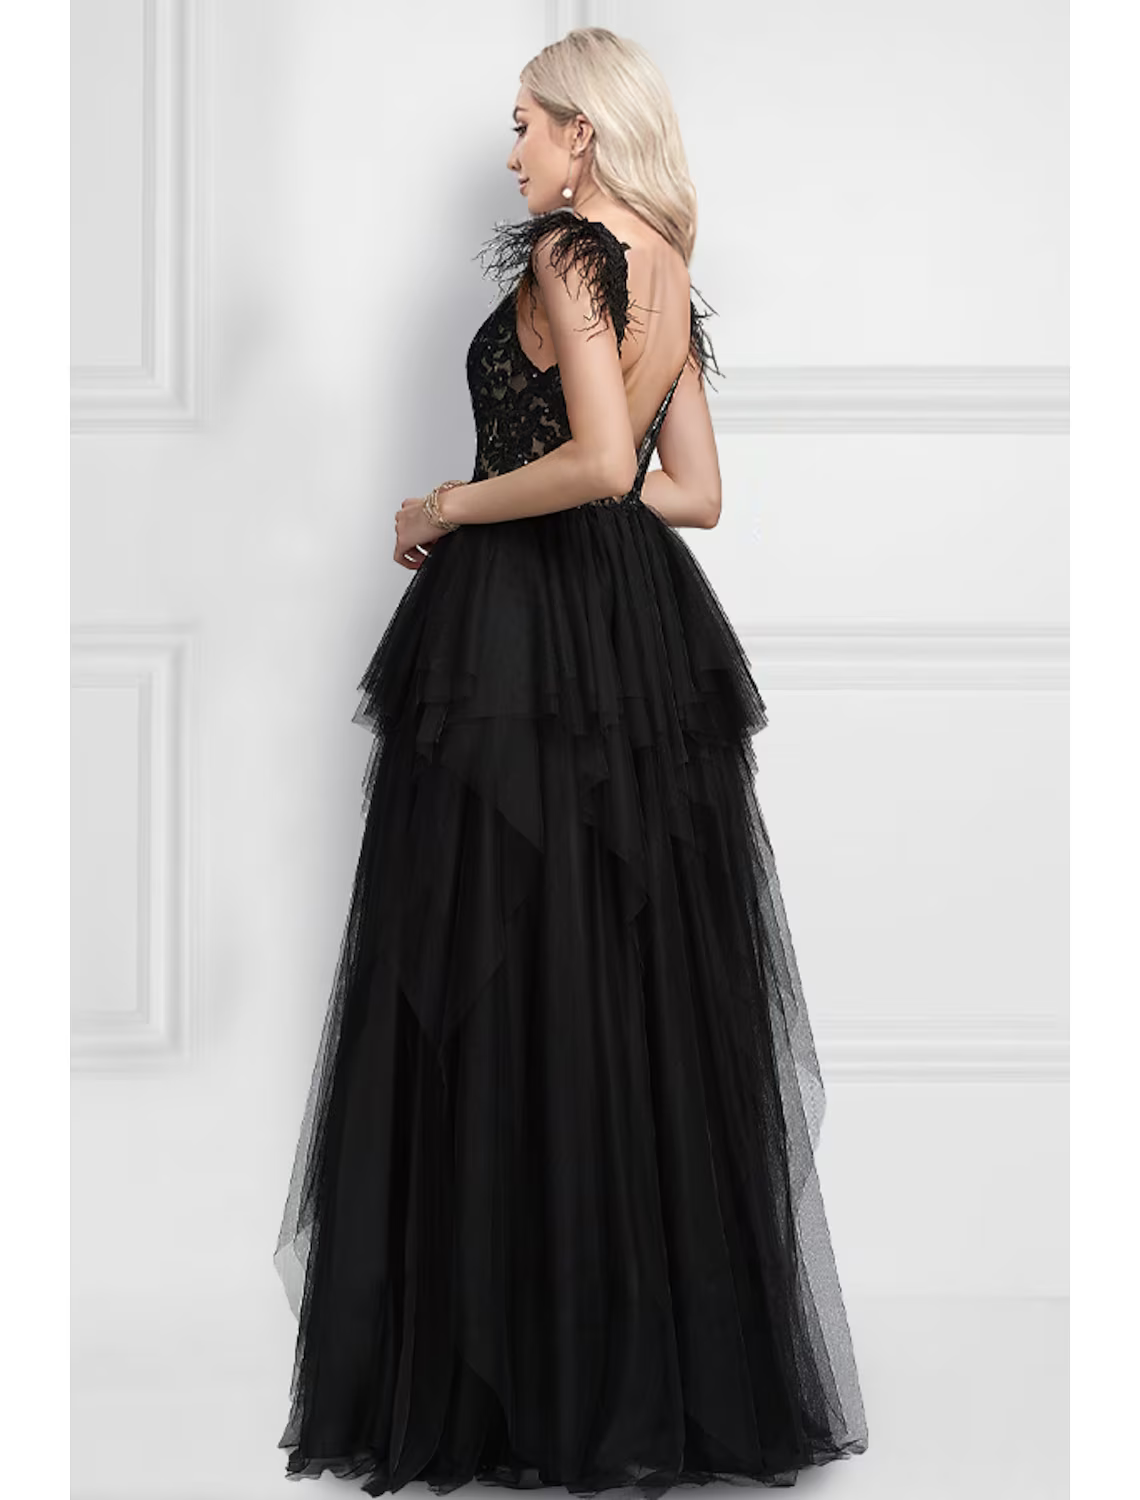 A-Line Prom Dresses Black Dress Wedding Party Floor Length Sleeveless V Neck Tulle with Feather Appliques